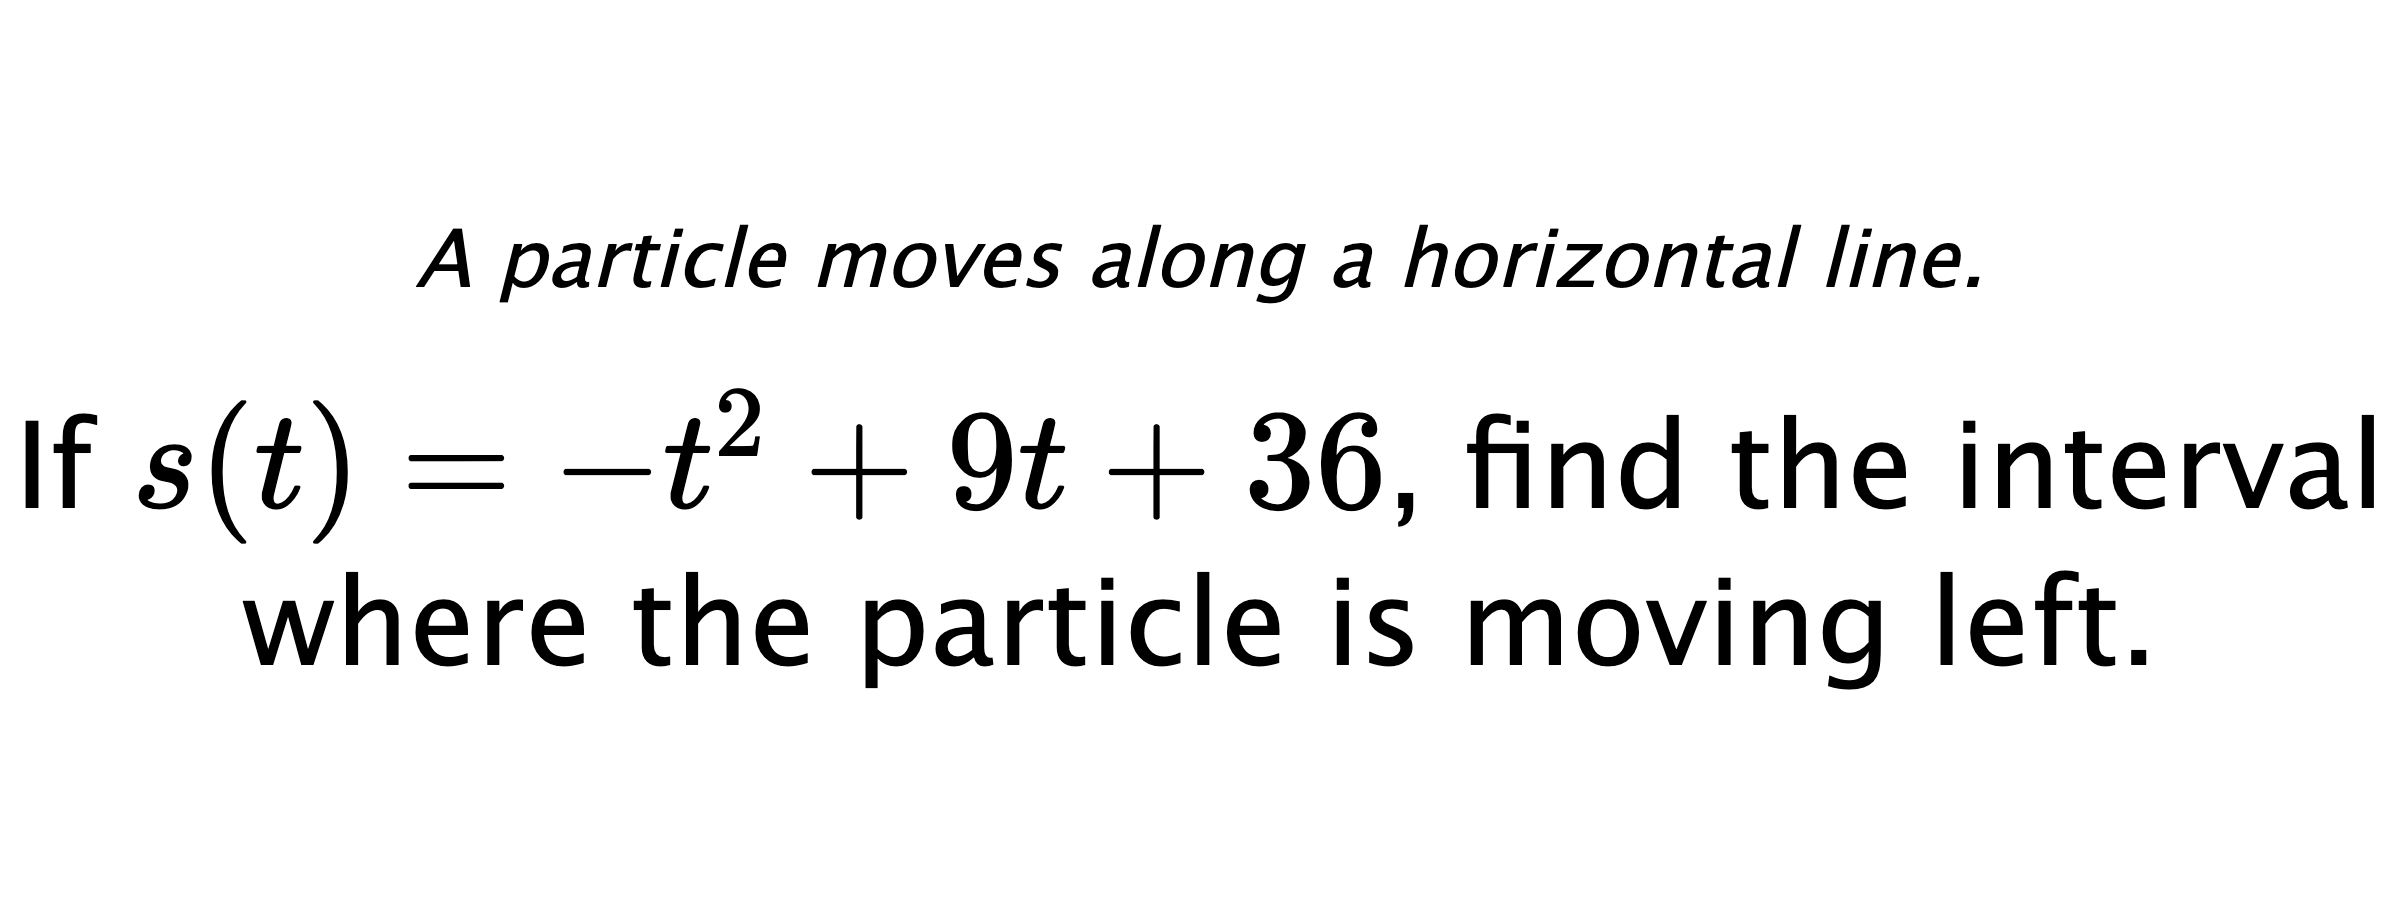 A particle moves along a horizontal line. If $ s(t)=-t^2+9t+36 $, find the interval where the particle is moving left.